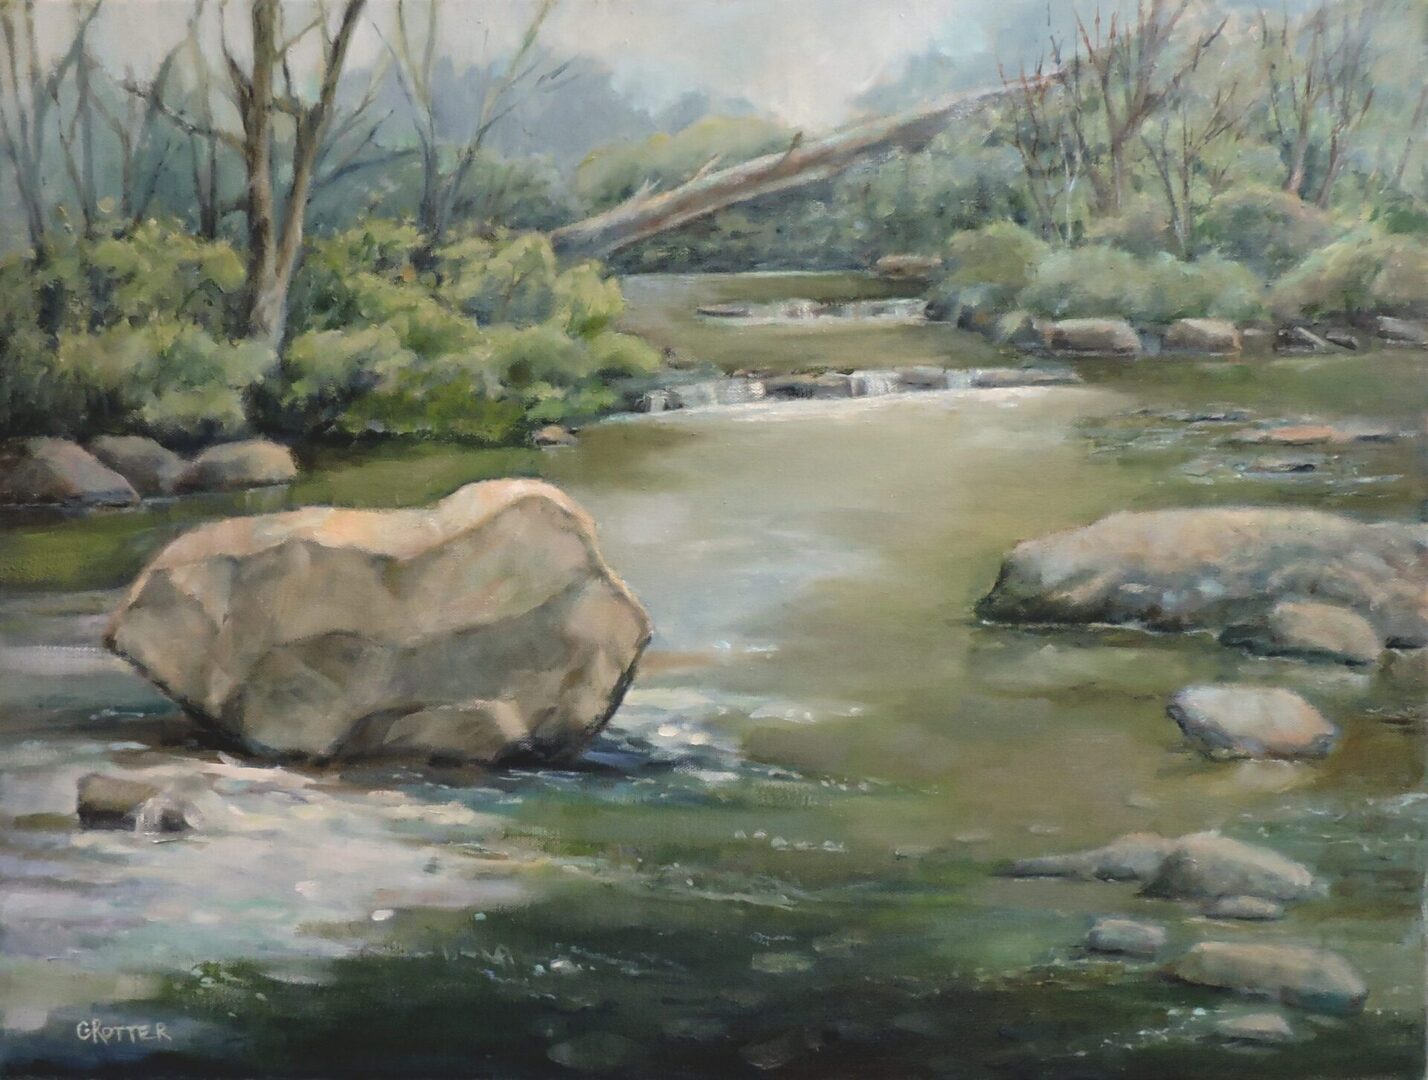 A painting of a river